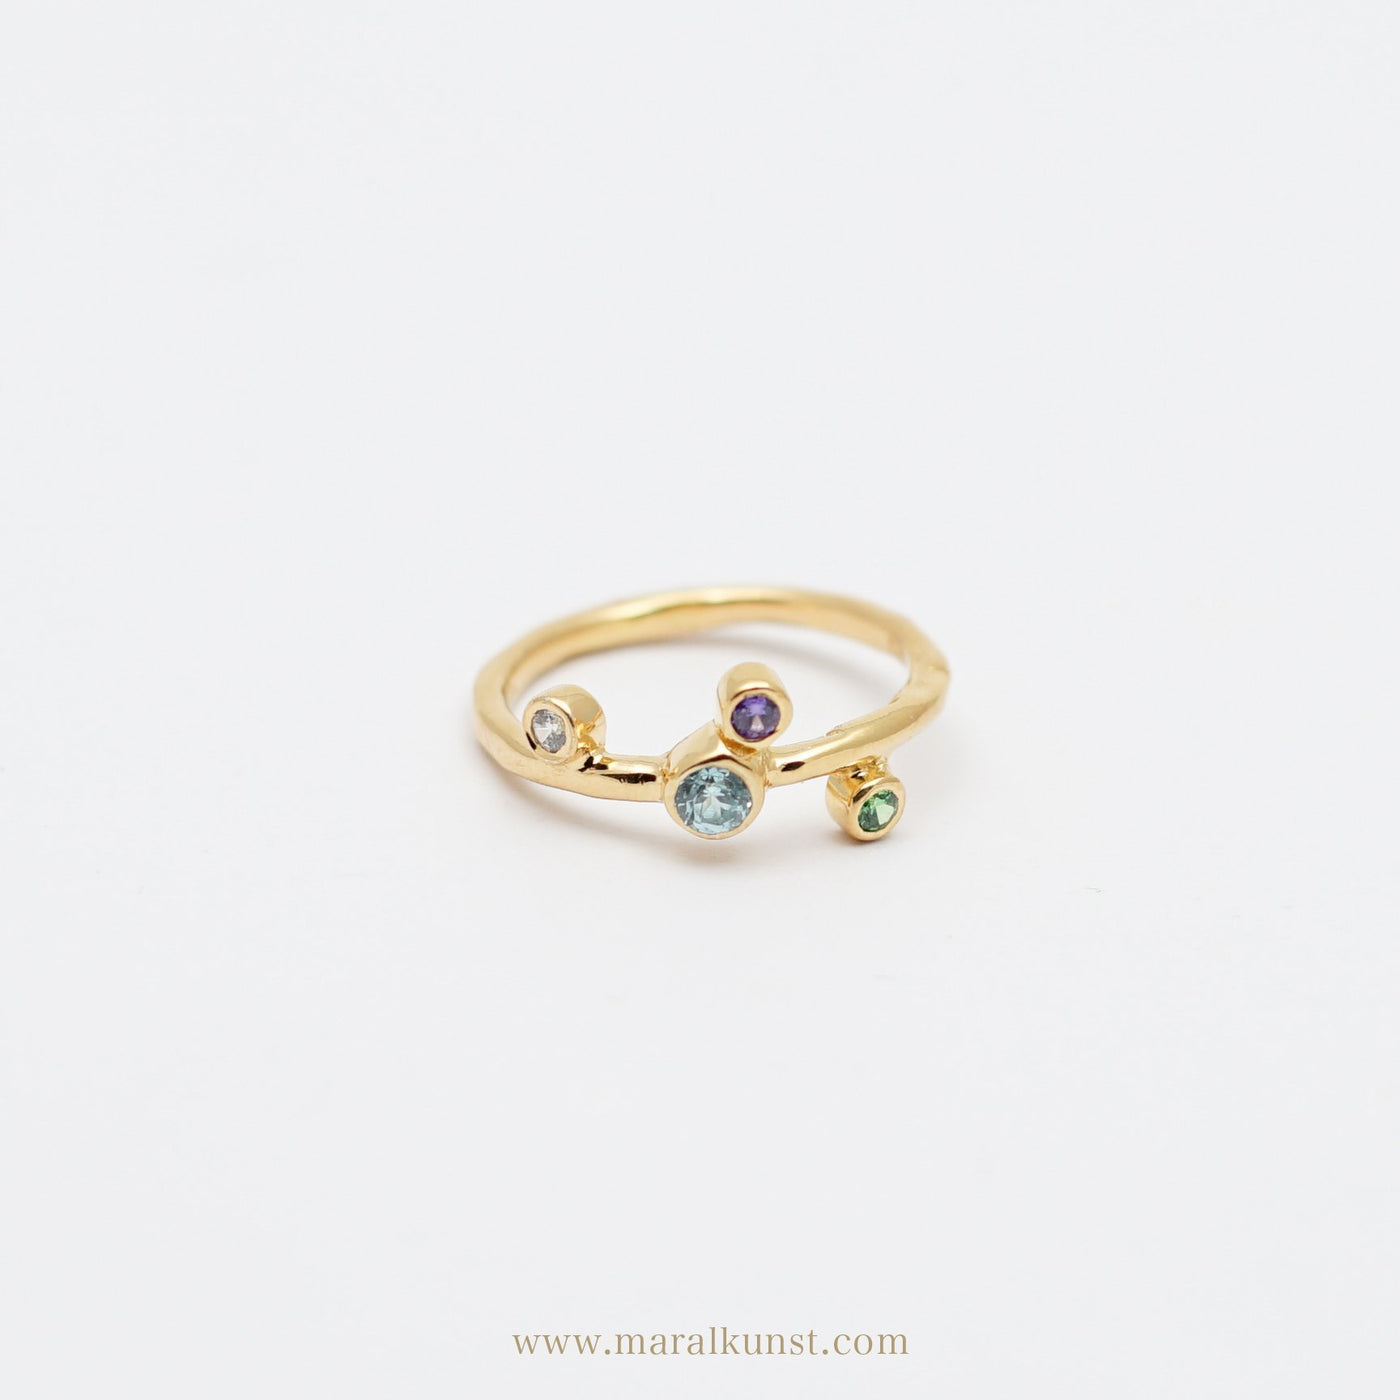 Minimalist Crystal Stack Ring in Gold - Maral Kunst Jewelry